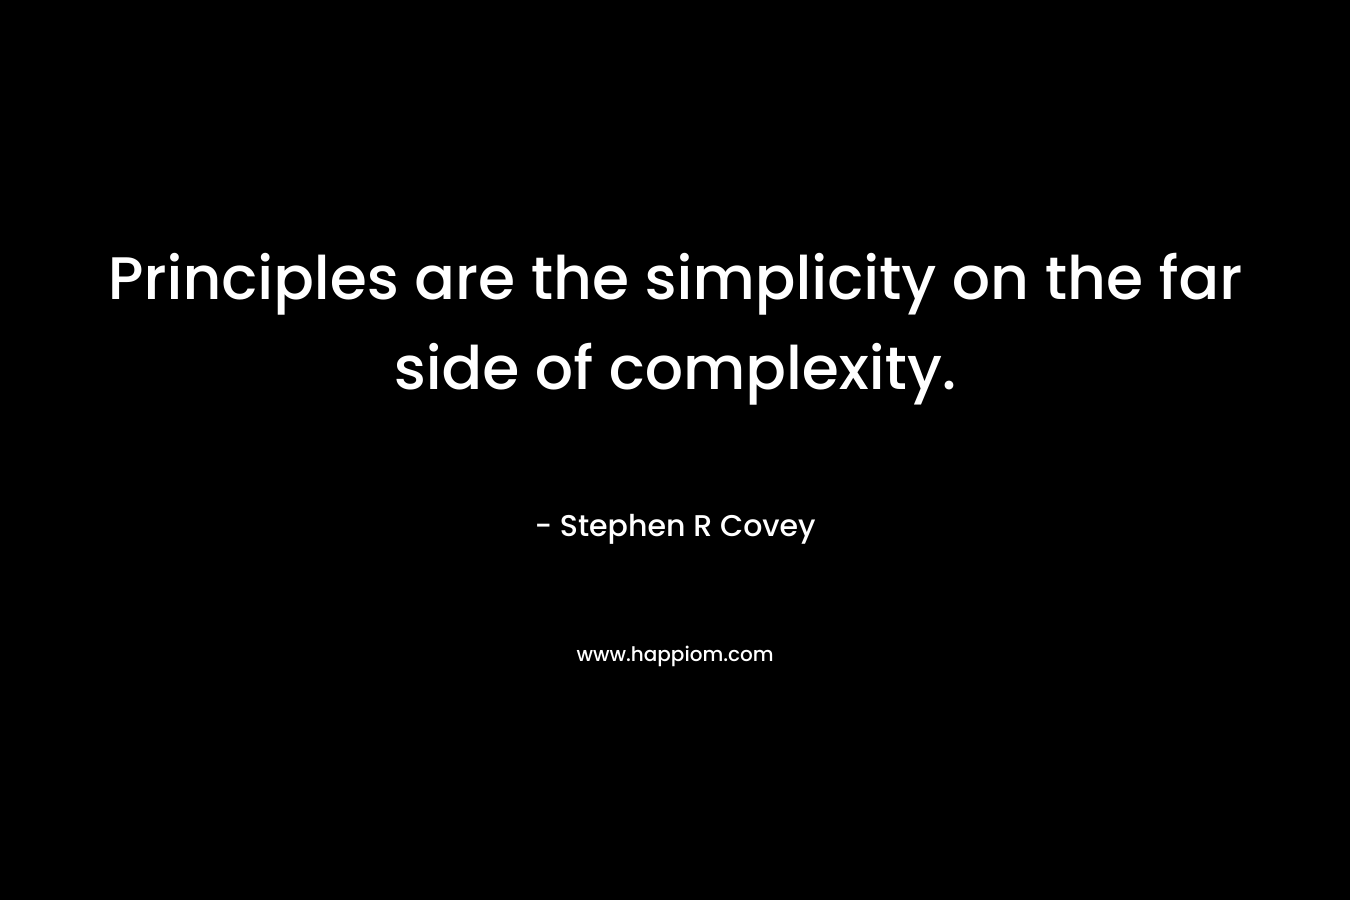 Principles are the simplicity on the far side of complexity. – Stephen R Covey